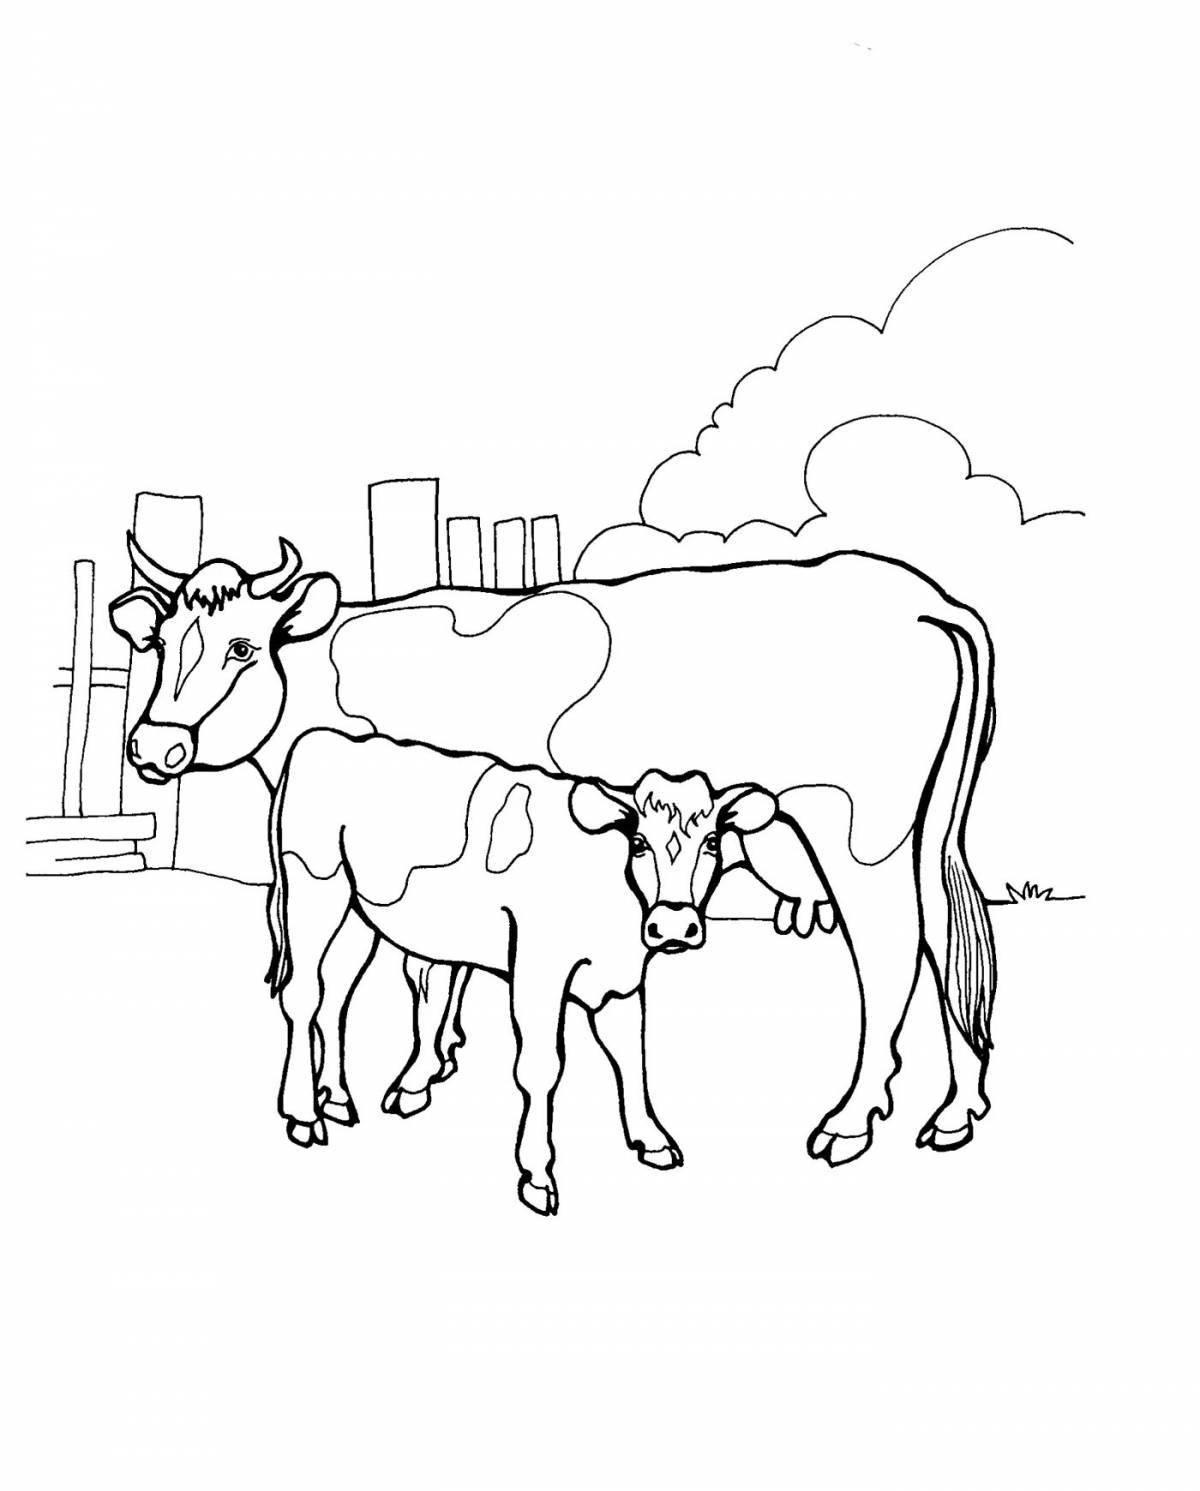 Coloured cow and calf coloring page